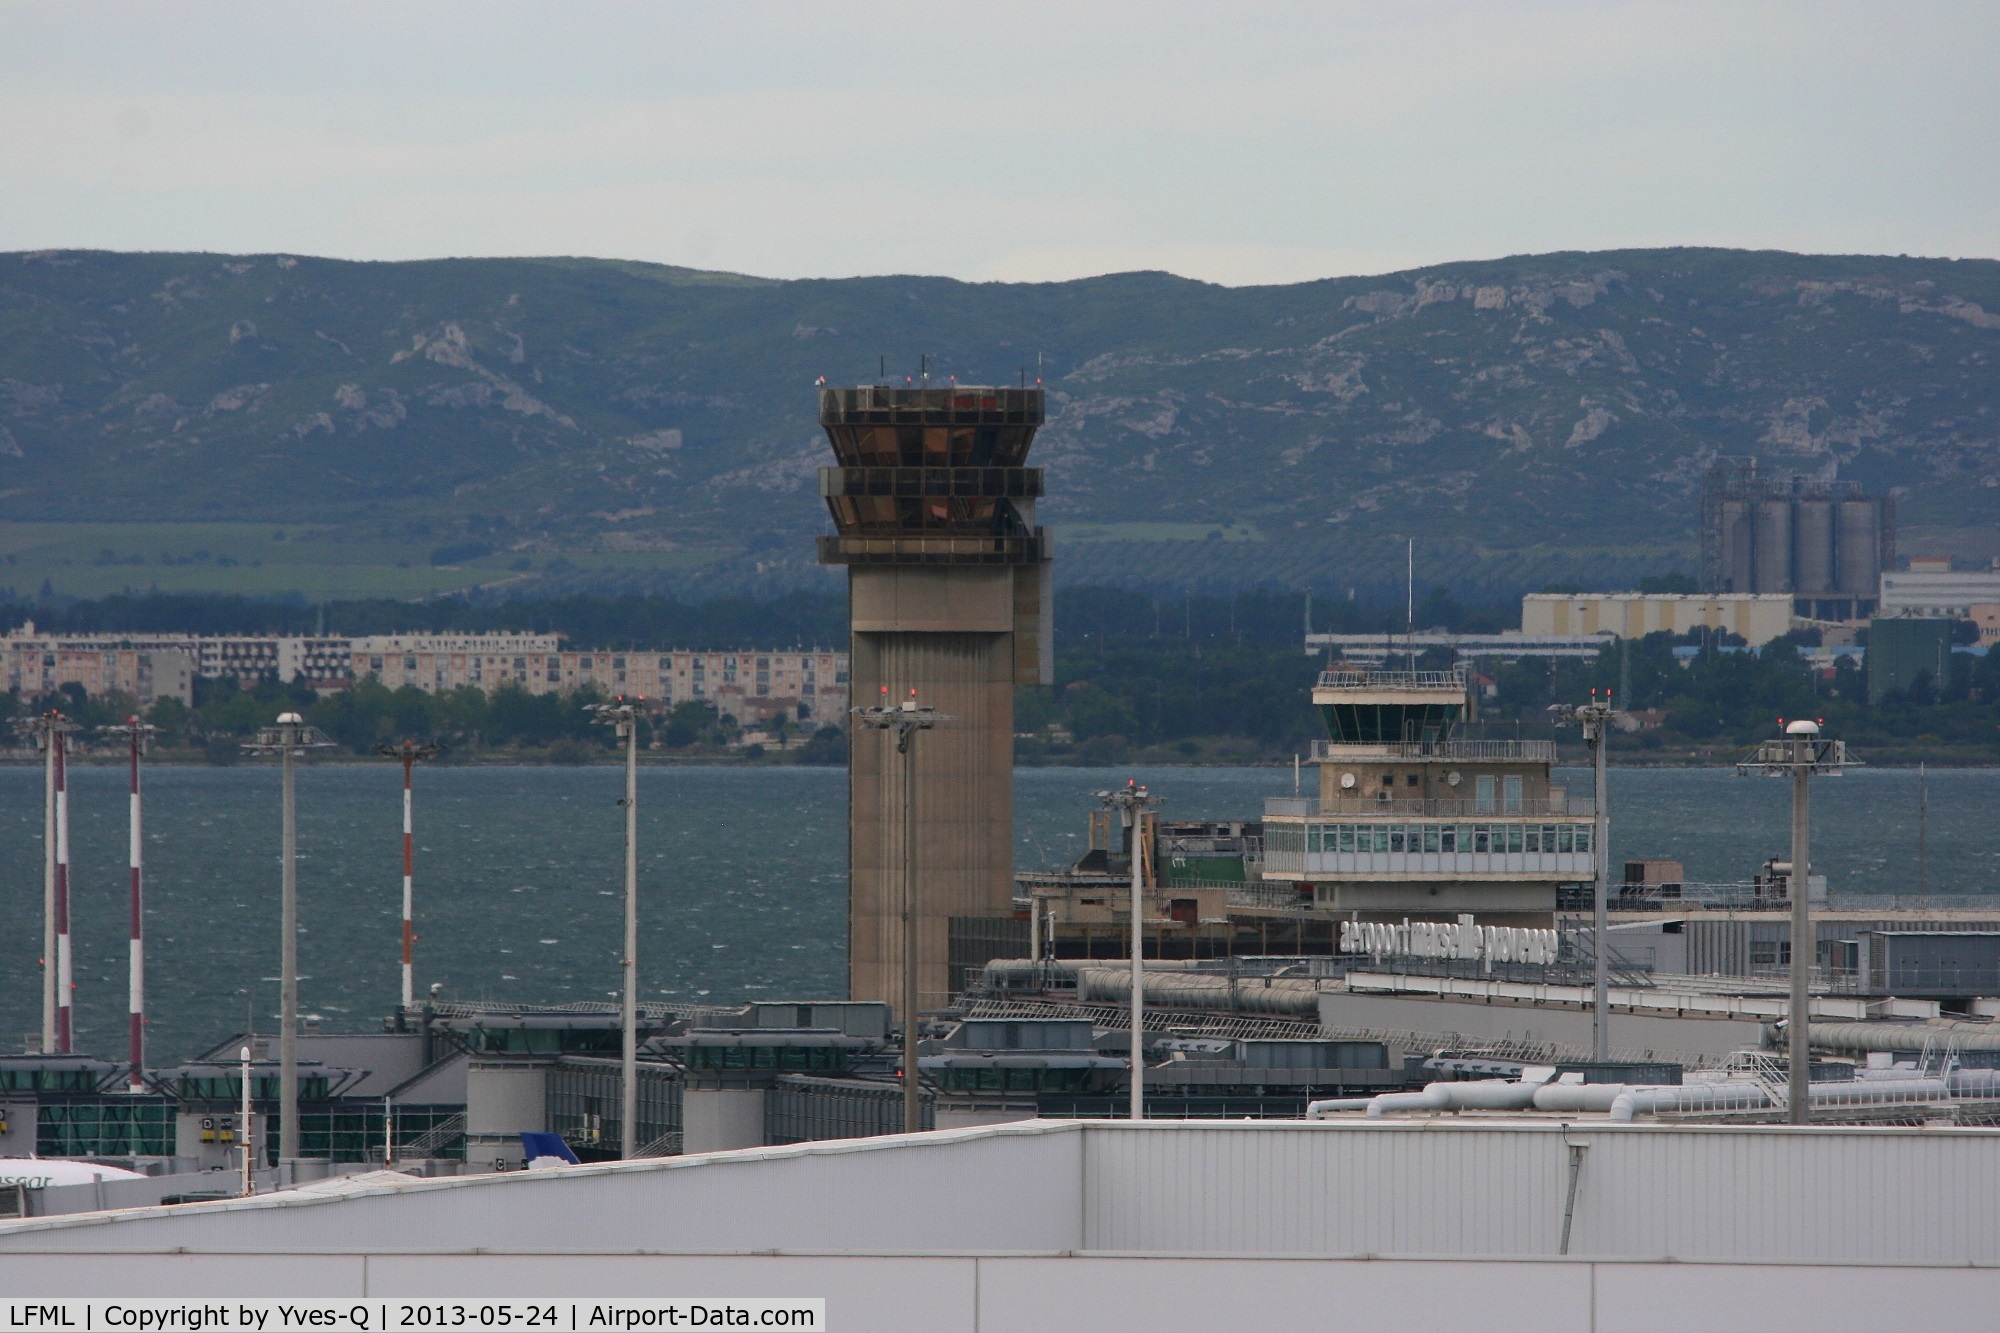 Marseille Provence Airport, Marseille France (LFML) - Control Tower, Marseille-Provence Airport (LFML-MRS)